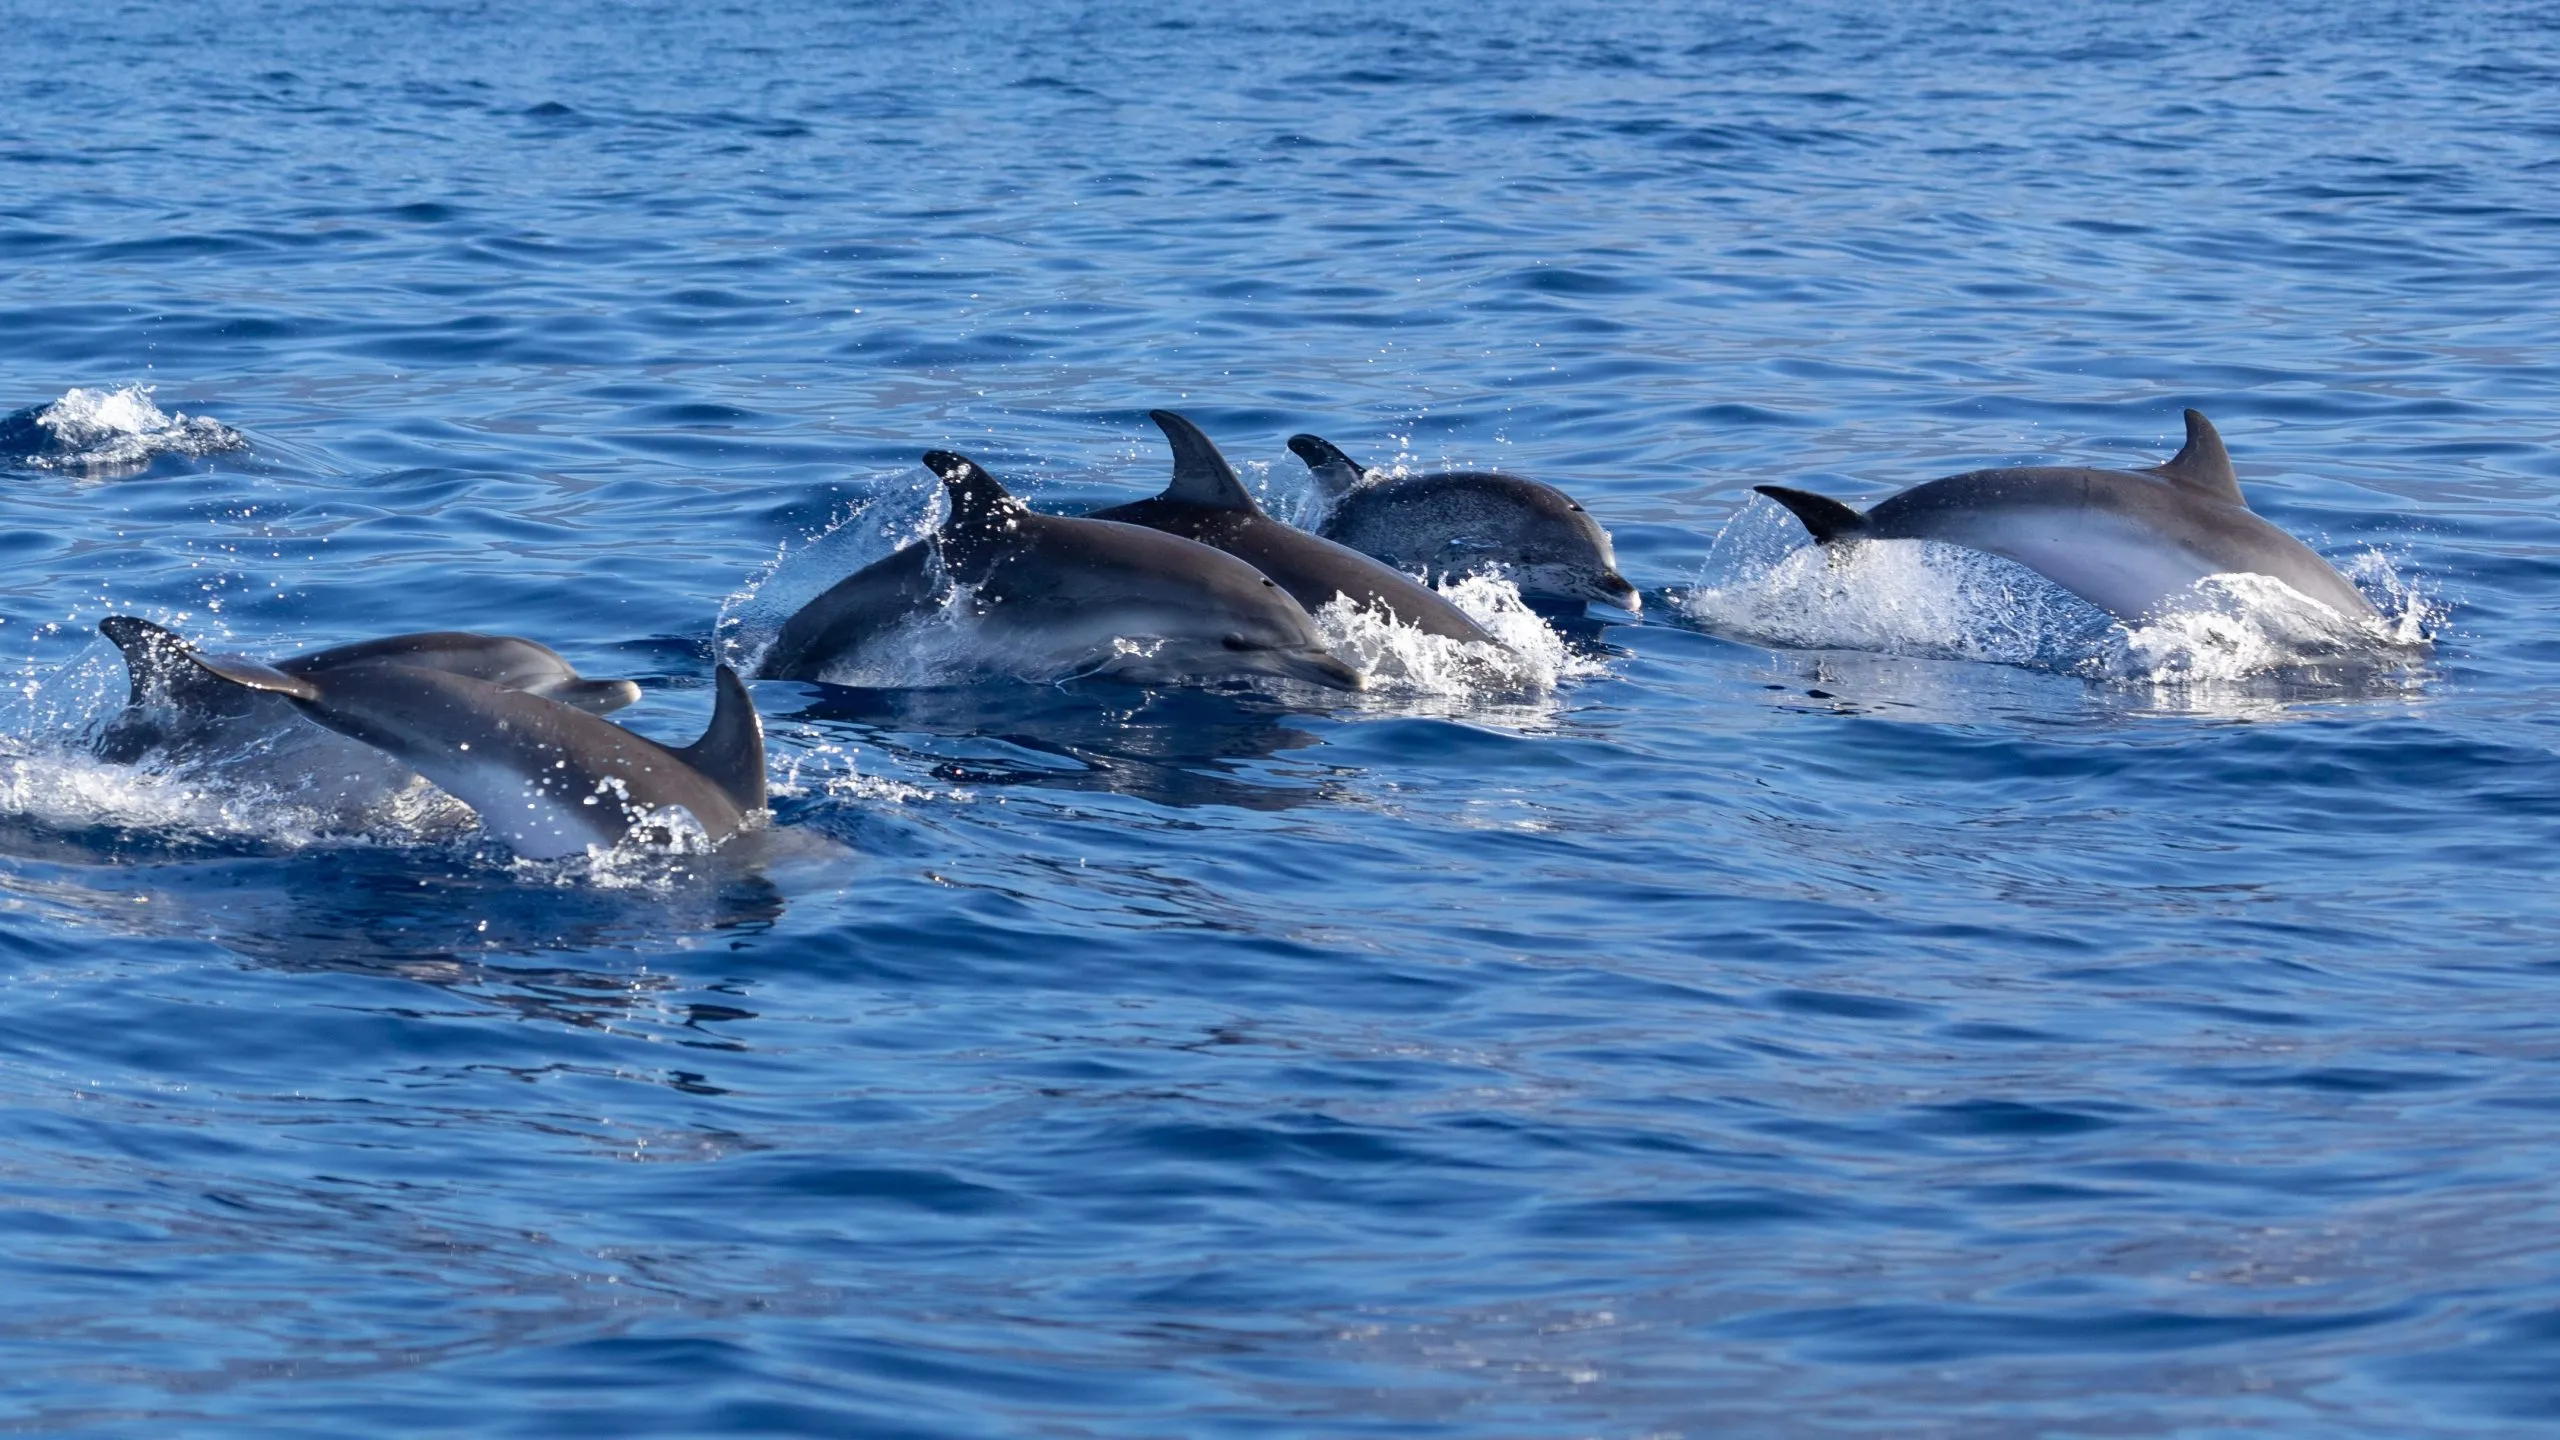 spotted dolphins a the ocean near madeira